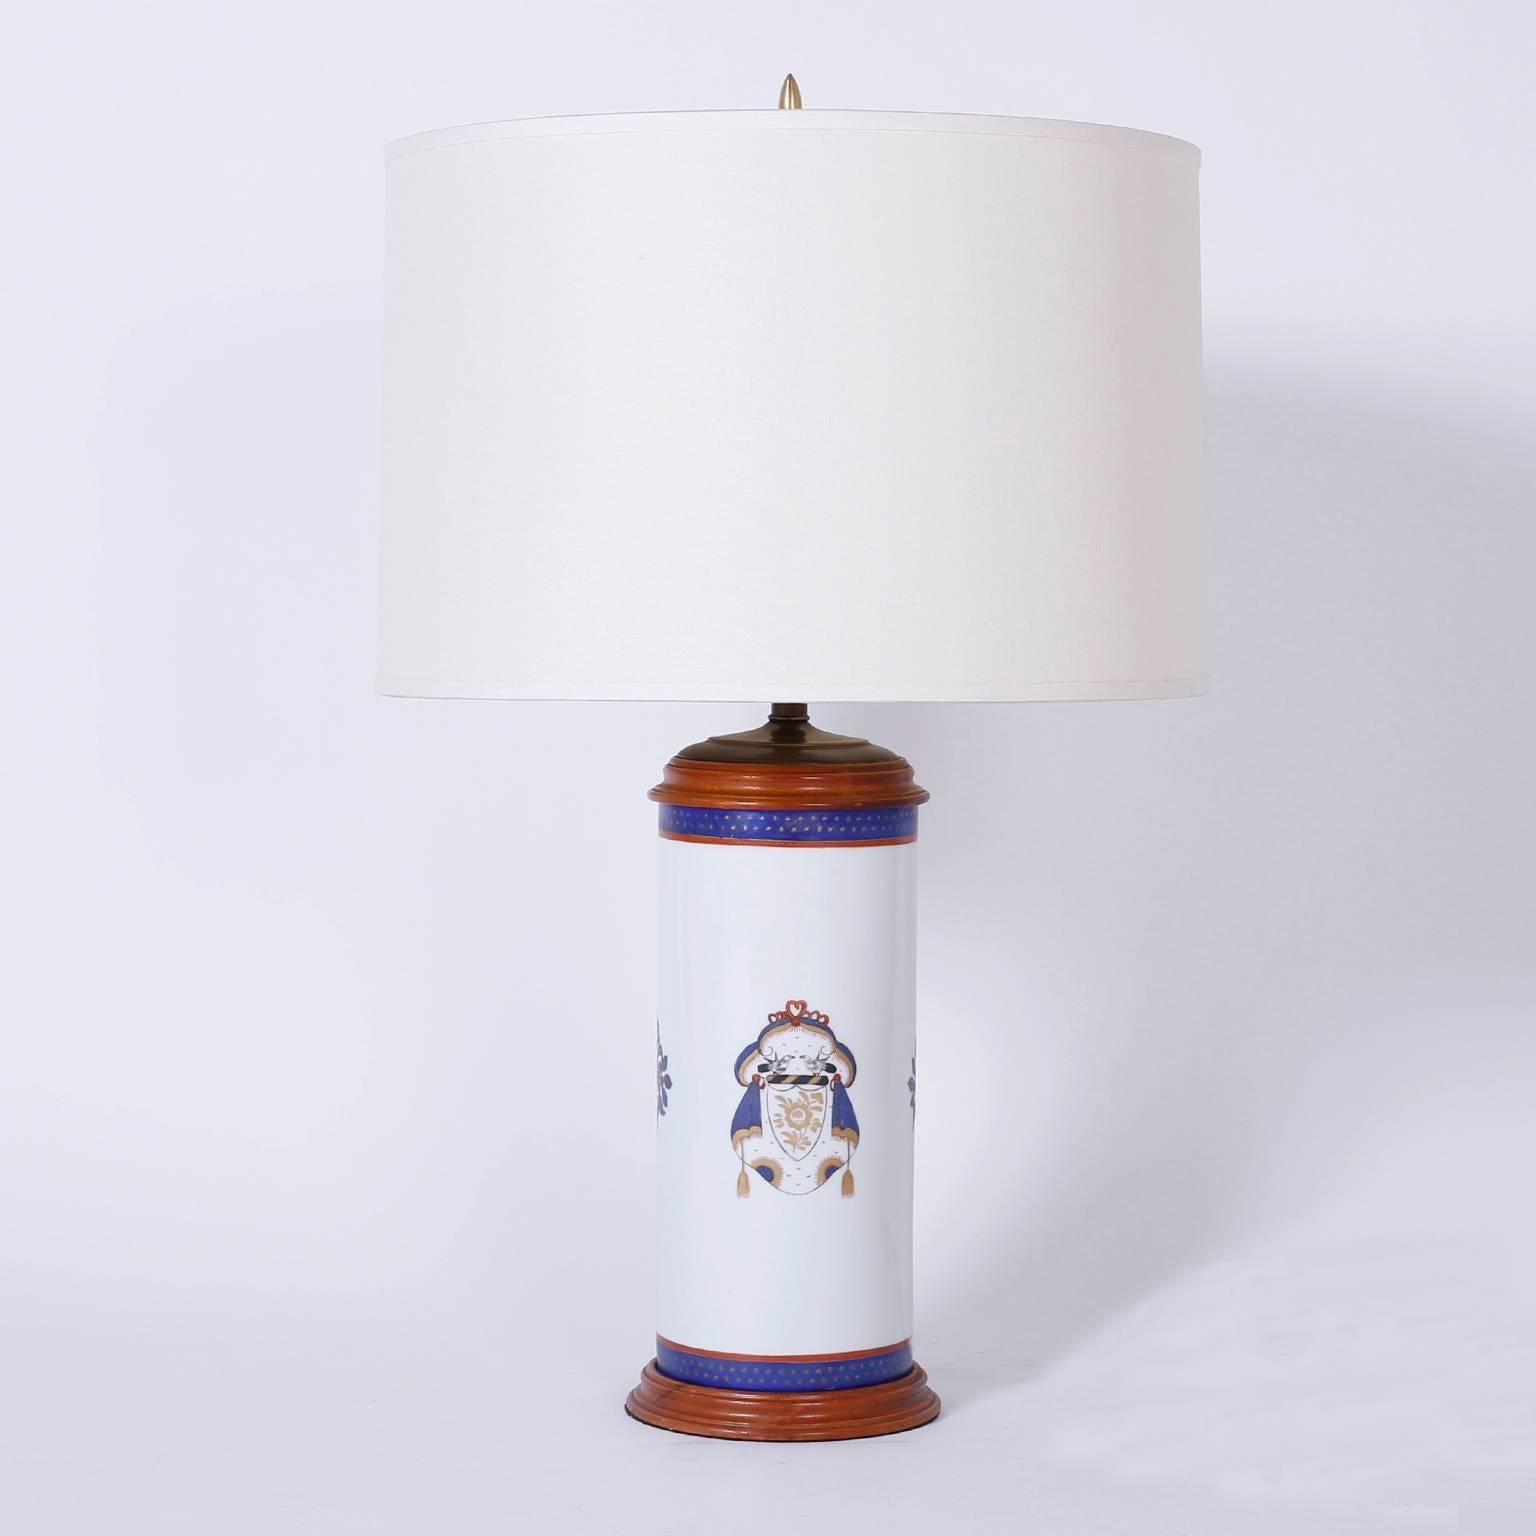 Handsome pair of porcelain table lamps hand-painted with Heraldic coats of arms and floral medallions on a white background.